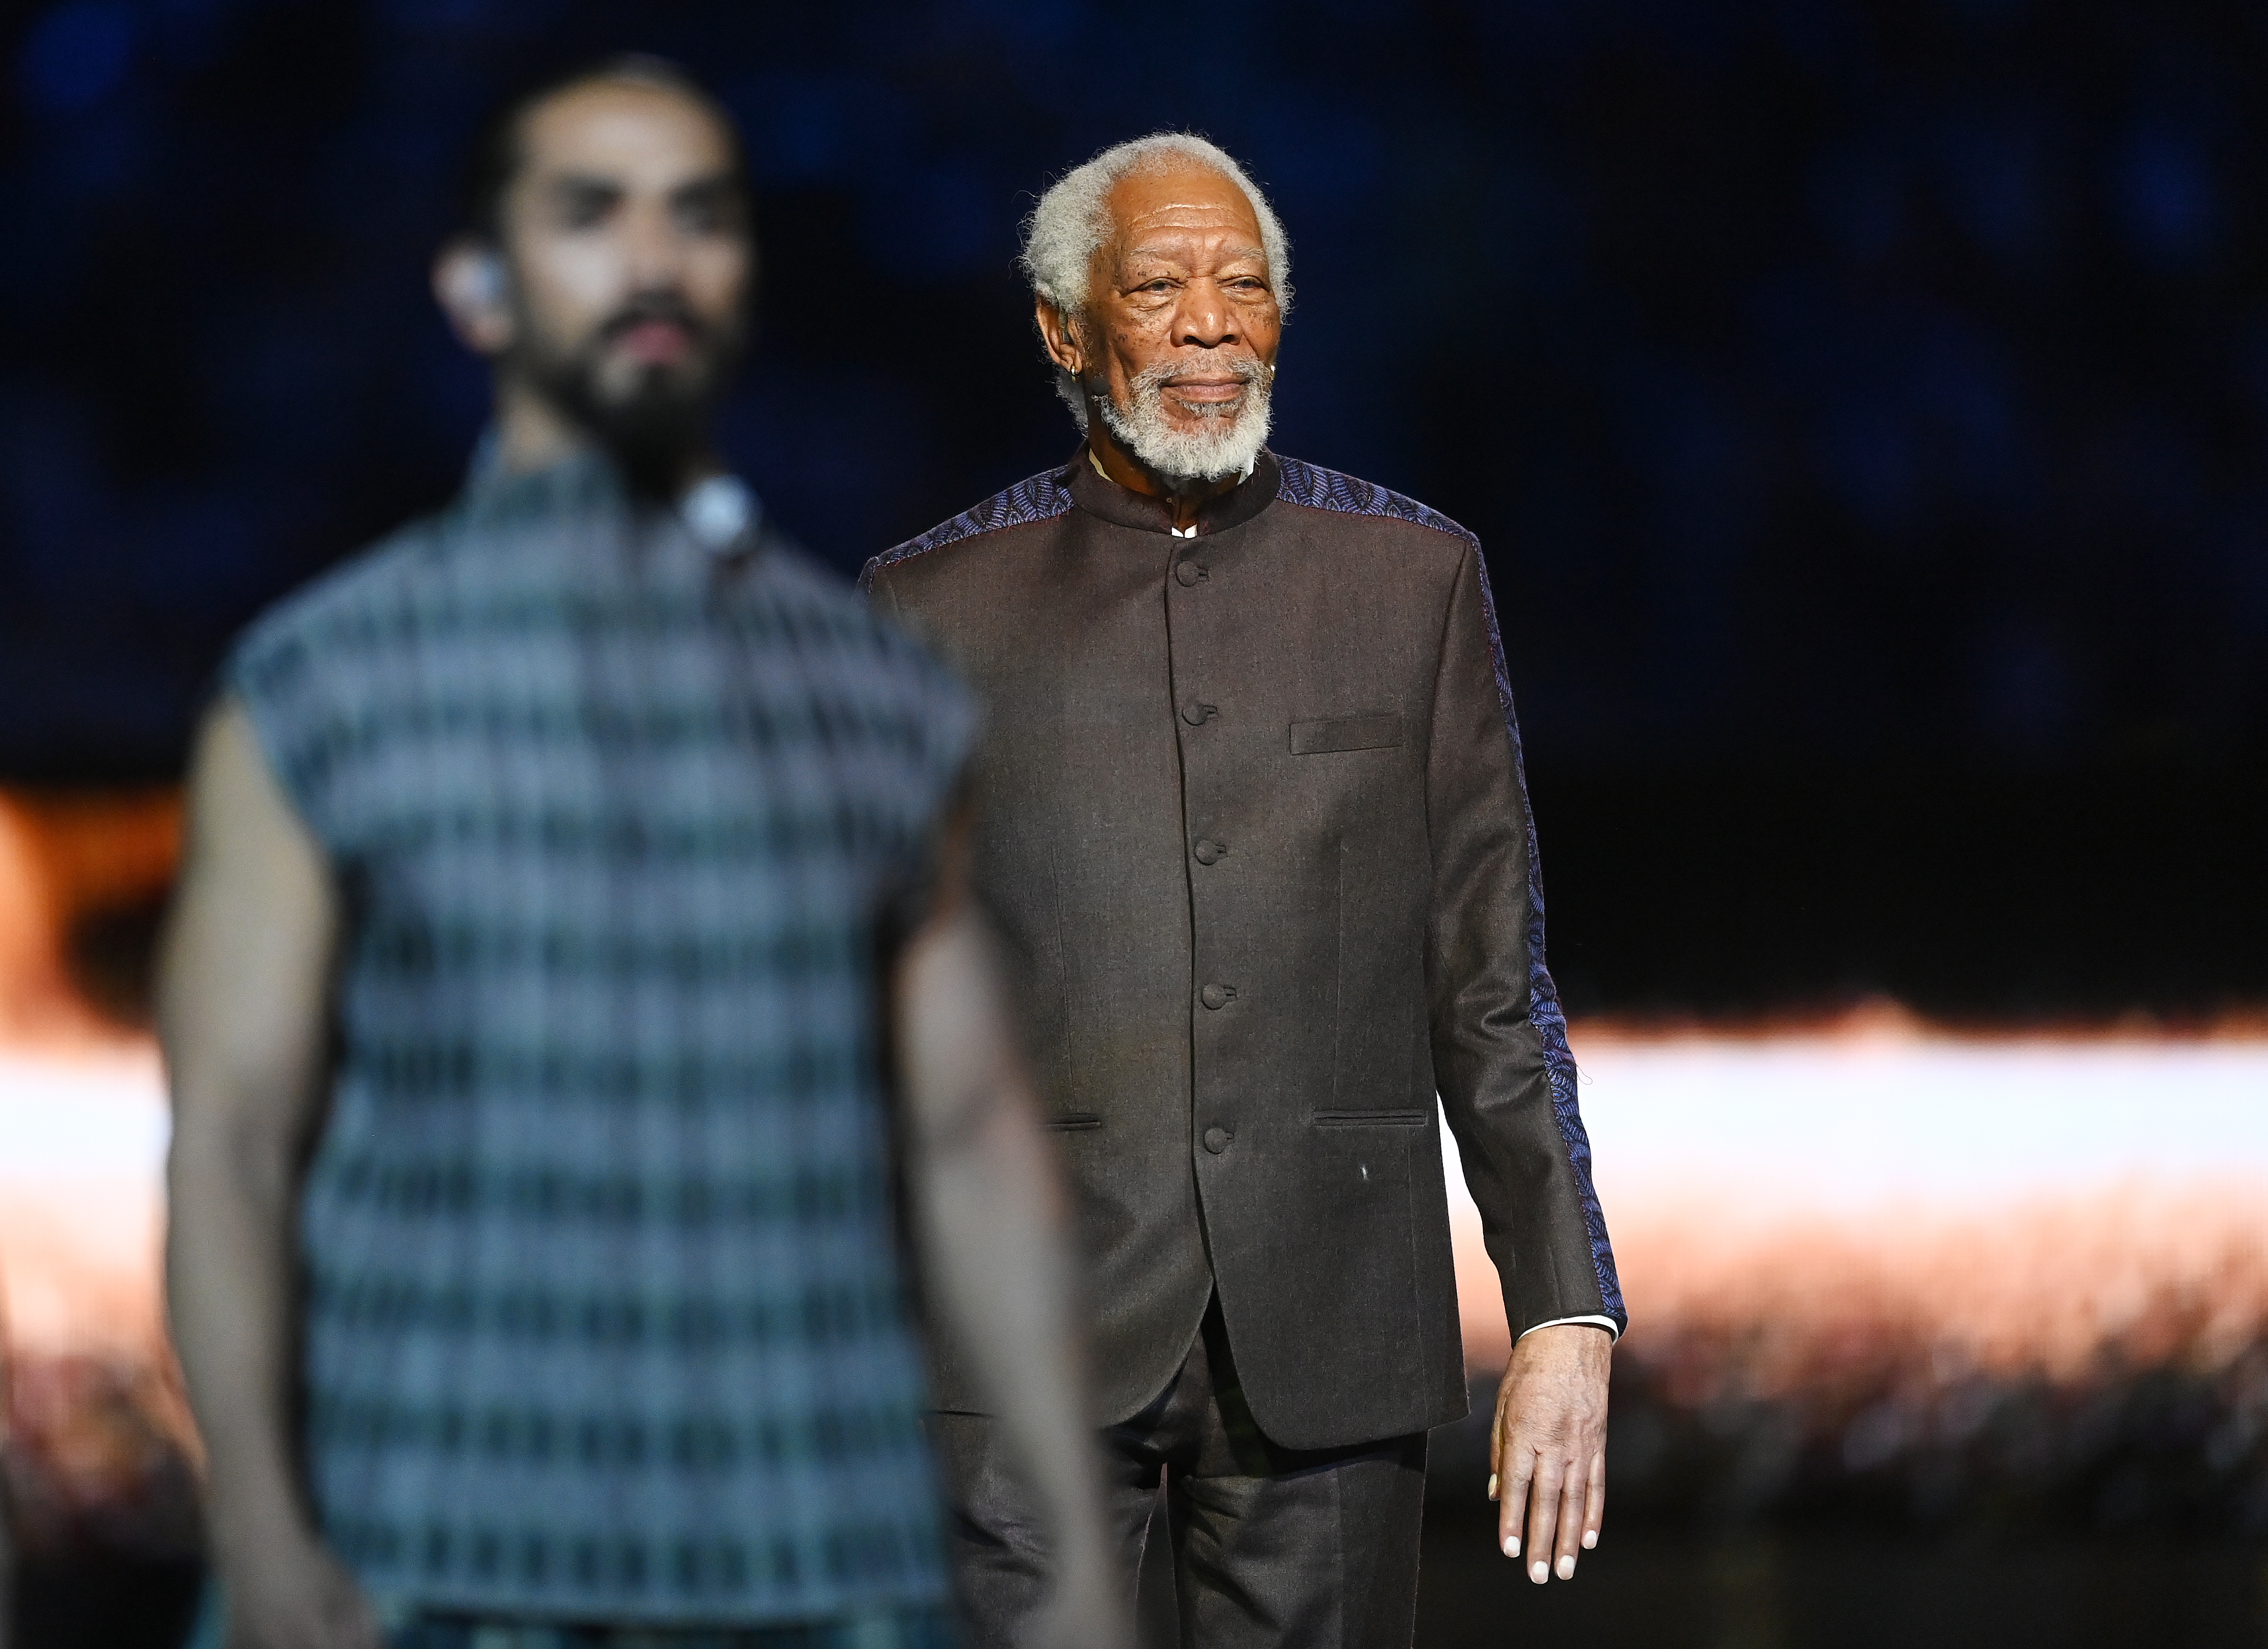 Morgan Freeman at the FIFA World Cup in Qatar in 2022 | Source: Getty Images